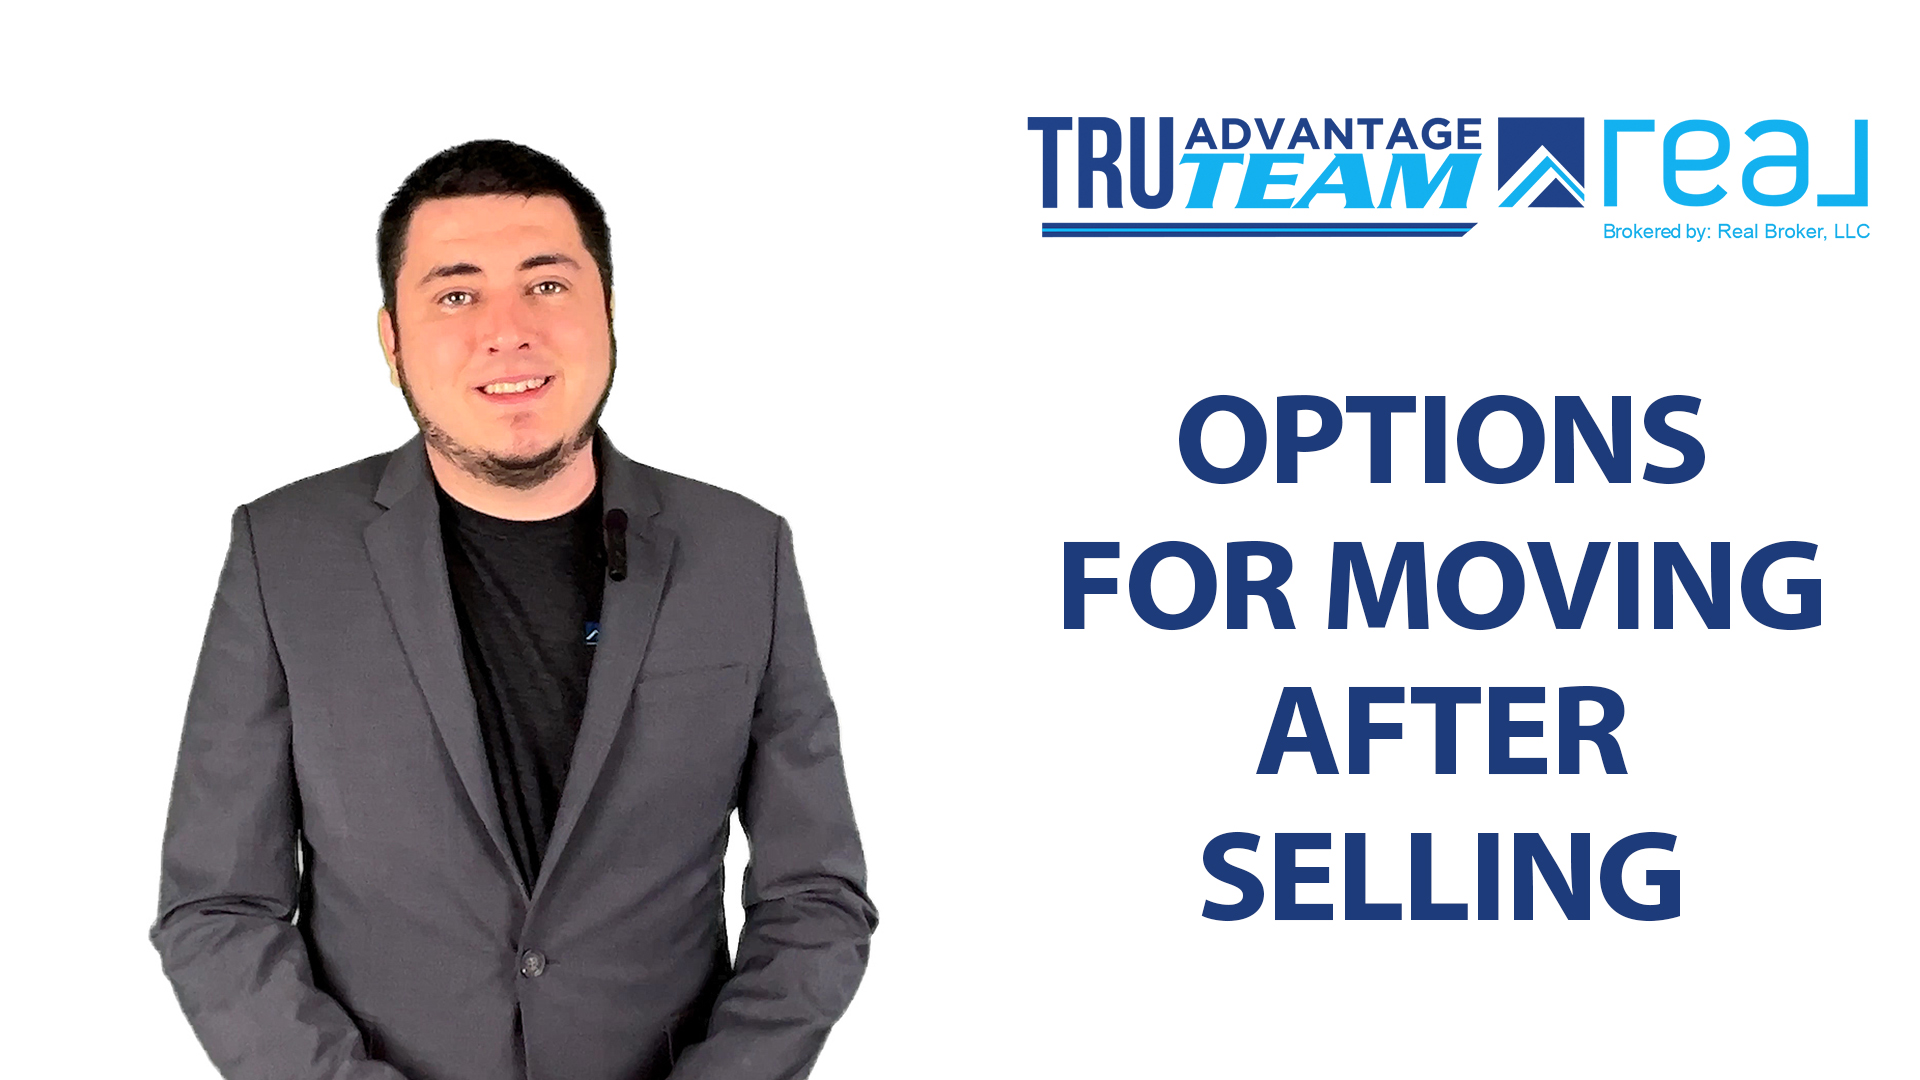 What Are Your Options After Selling?